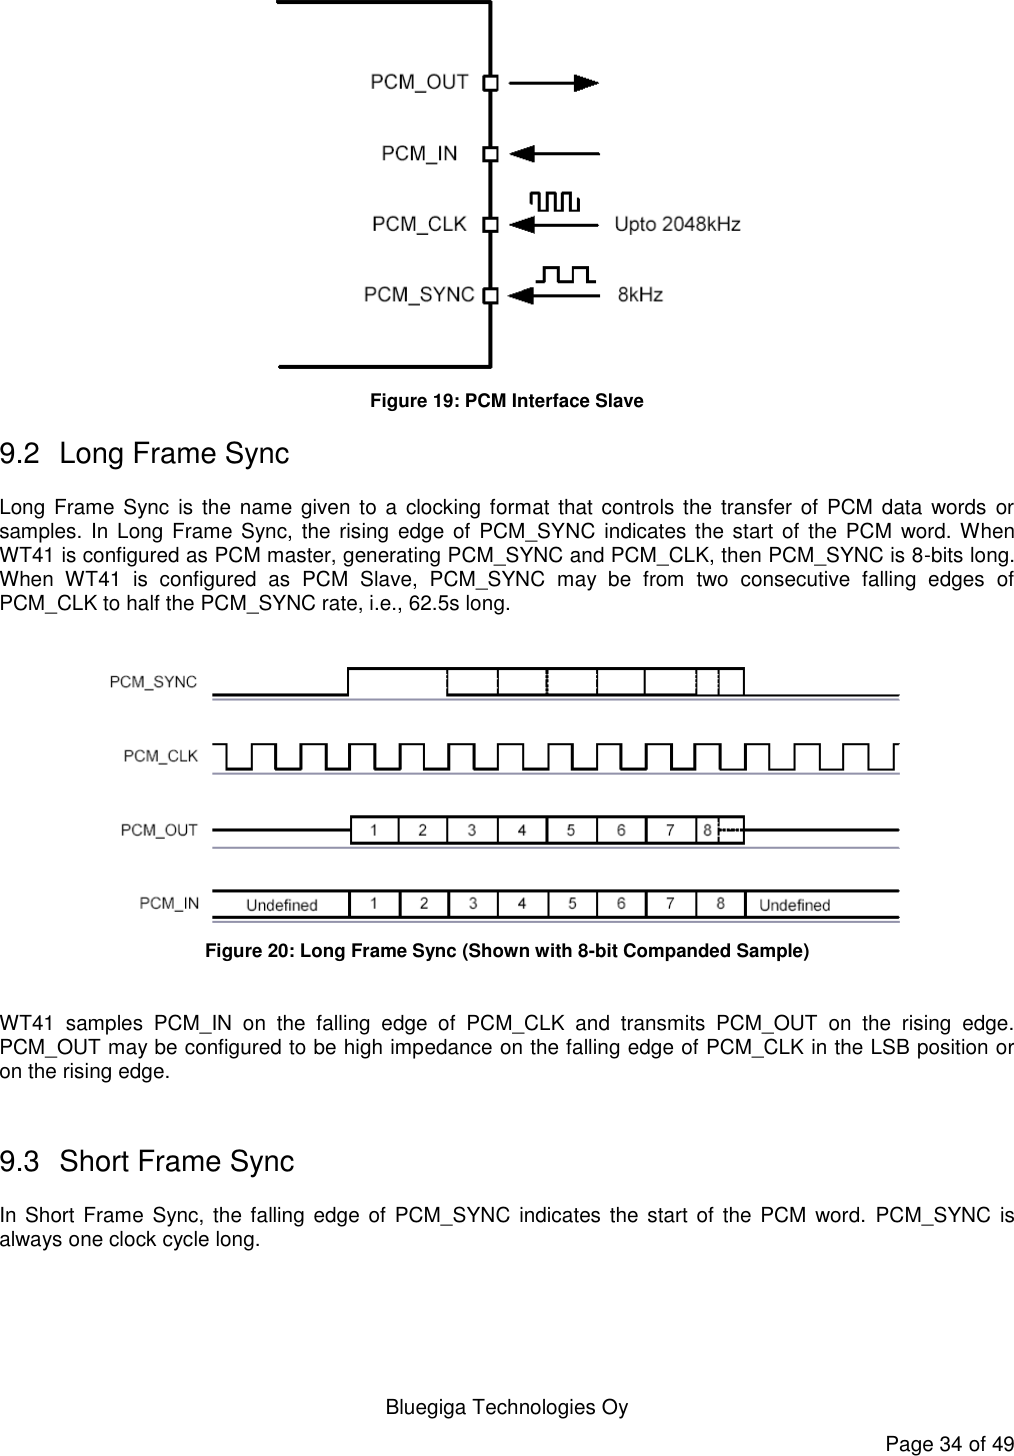   Bluegiga Technologies Oy Page 34 of 49  Figure 19: PCM Interface Slave 9.2  Long Frame Sync Long Frame Sync is  the name given to  a clocking format that controls  the transfer of  PCM  data words  or samples. In Long  Frame  Sync,  the  rising edge  of PCM_SYNC indicates  the  start  of  the PCM word. When WT41 is configured as PCM master, generating PCM_SYNC and PCM_CLK, then PCM_SYNC is 8-bits long. When  WT41  is  configured  as  PCM  Slave,  PCM_SYNC  may  be  from  two  consecutive  falling  edges  of PCM_CLK to half the PCM_SYNC rate, i.e., 62.5s long.   Figure 20: Long Frame Sync (Shown with 8-bit Companded Sample)  WT41  samples  PCM_IN  on  the  falling  edge  of  PCM_CLK  and  transmits  PCM_OUT  on  the  rising  edge. PCM_OUT may be configured to be high impedance on the falling edge of PCM_CLK in the LSB position or on the rising edge.  9.3  Short Frame Sync In Short Frame  Sync, the falling edge of  PCM_SYNC  indicates  the  start  of the PCM word.  PCM_SYNC is always one clock cycle long. 